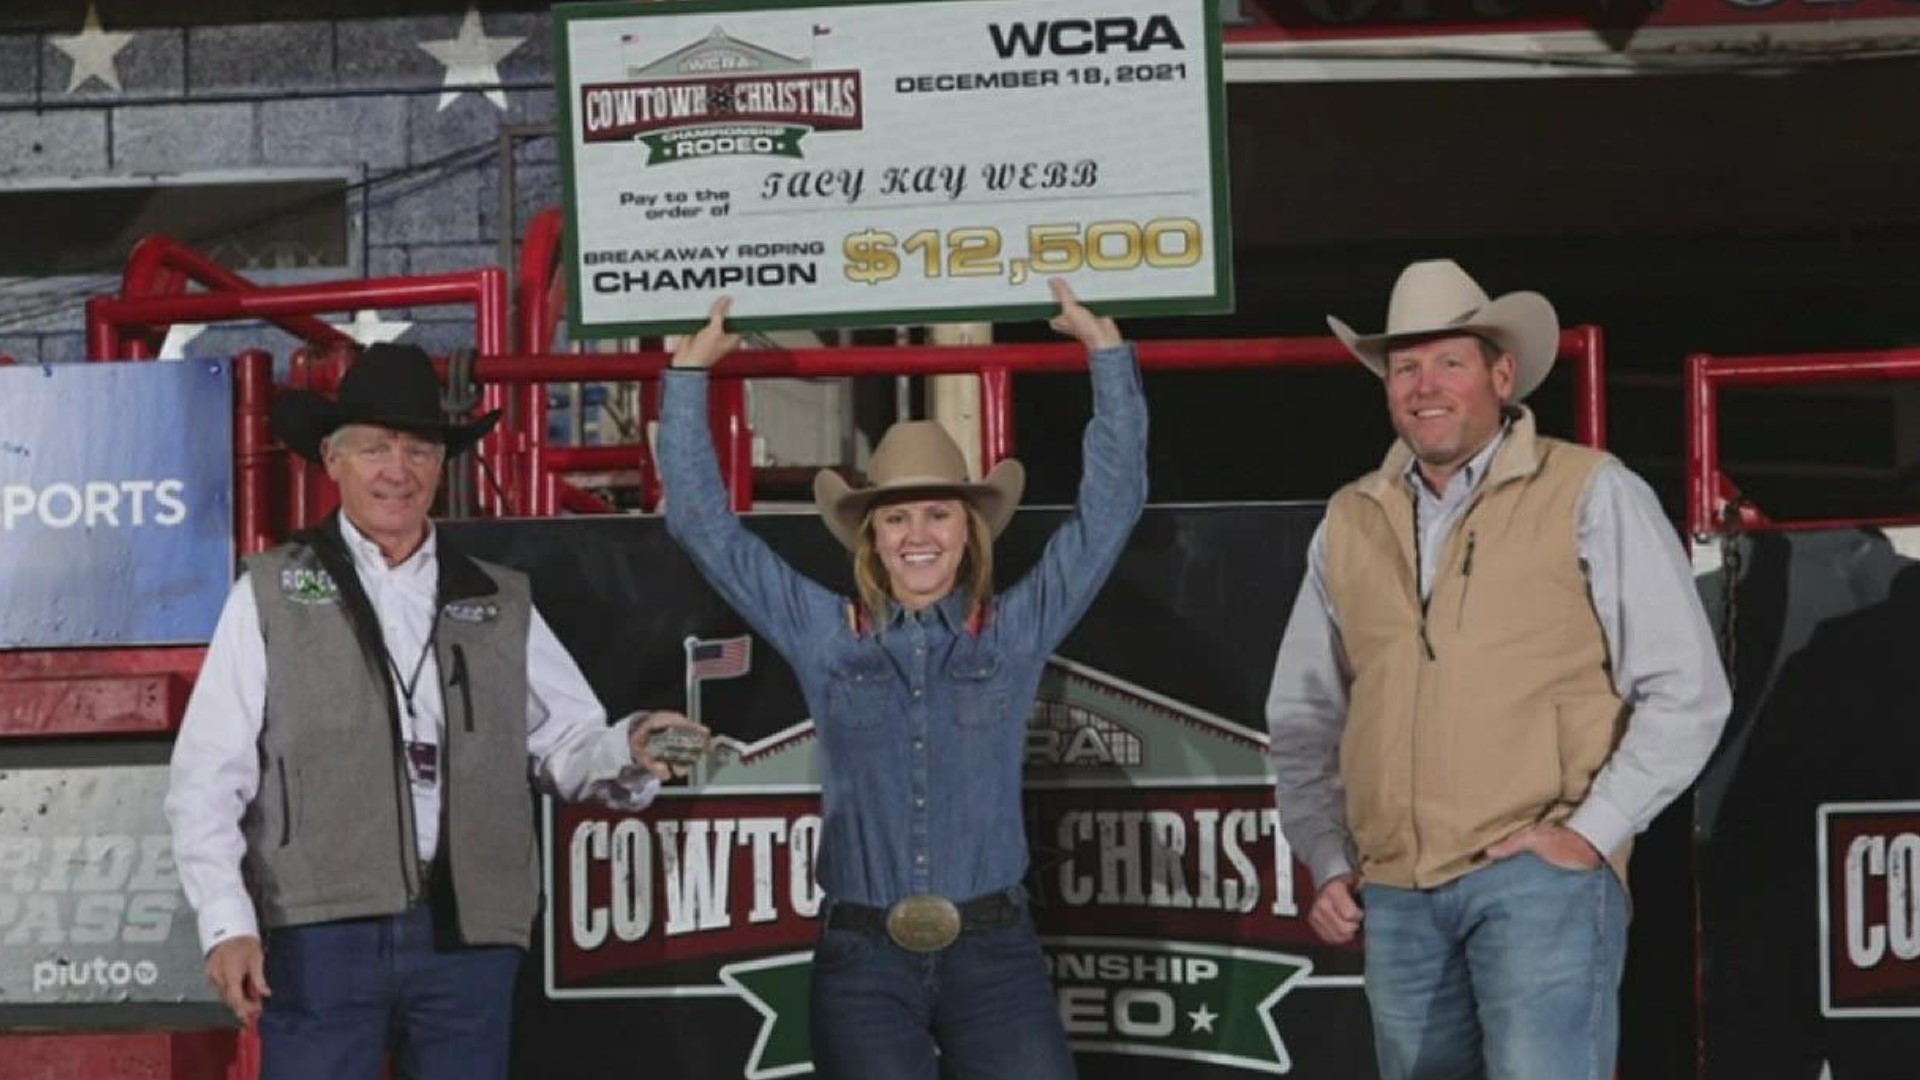 If Webb wins, she will be the first woman in rodeo to become an overnight millionaire, but she still wouldn't retire her scrubs.